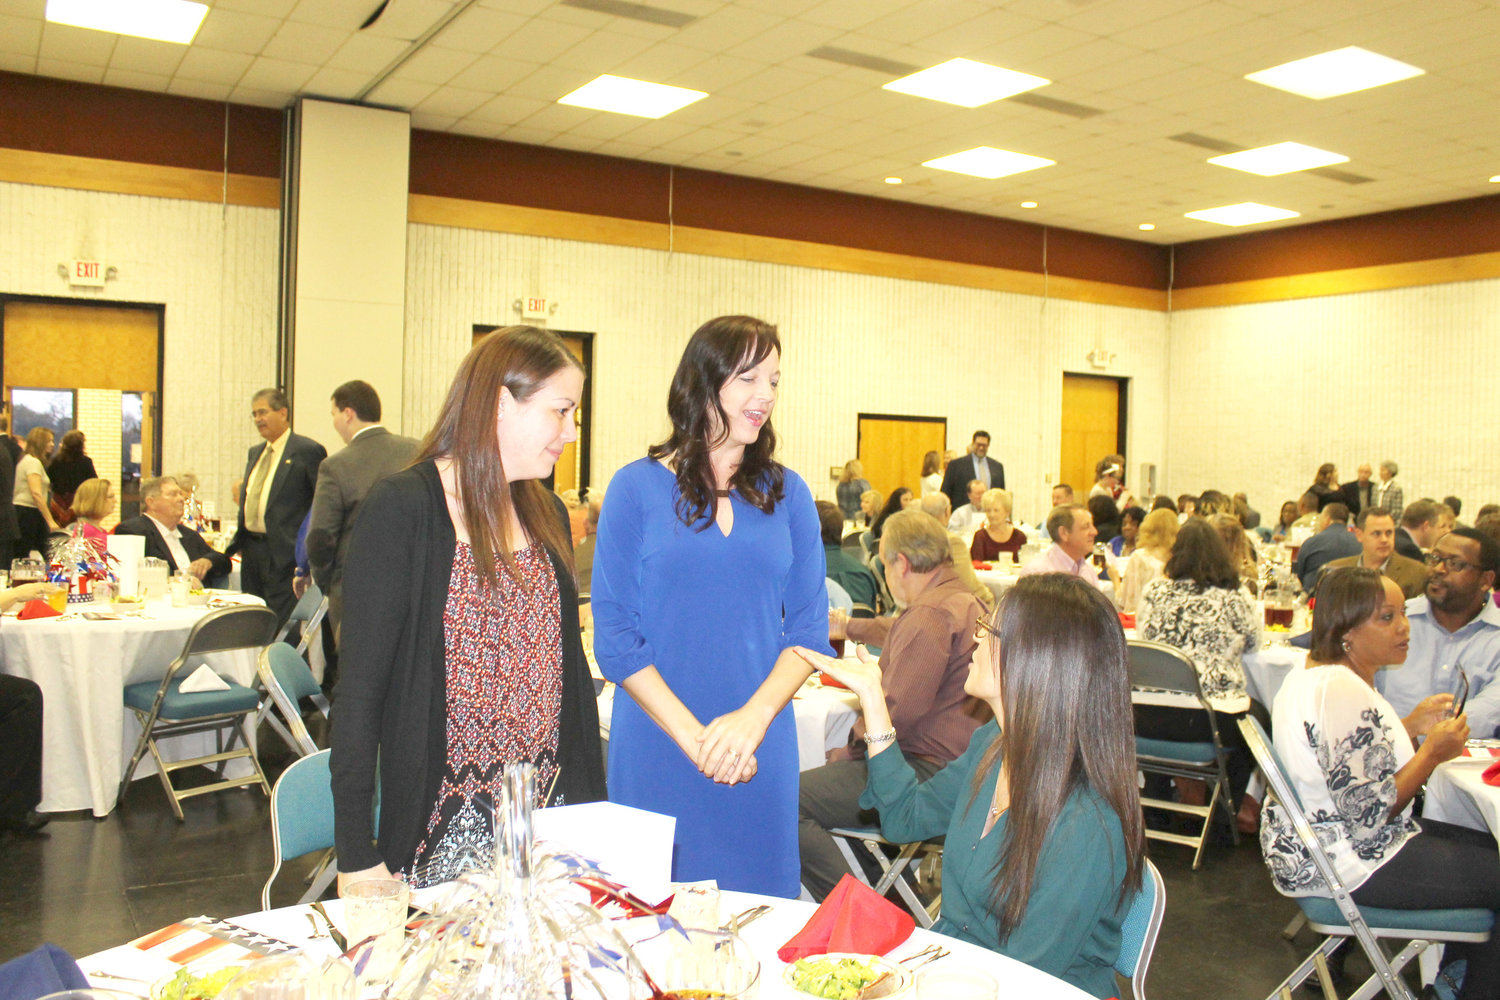 For the second consecutive year the chamber banquet at the Mineola Civic Center was sold out.